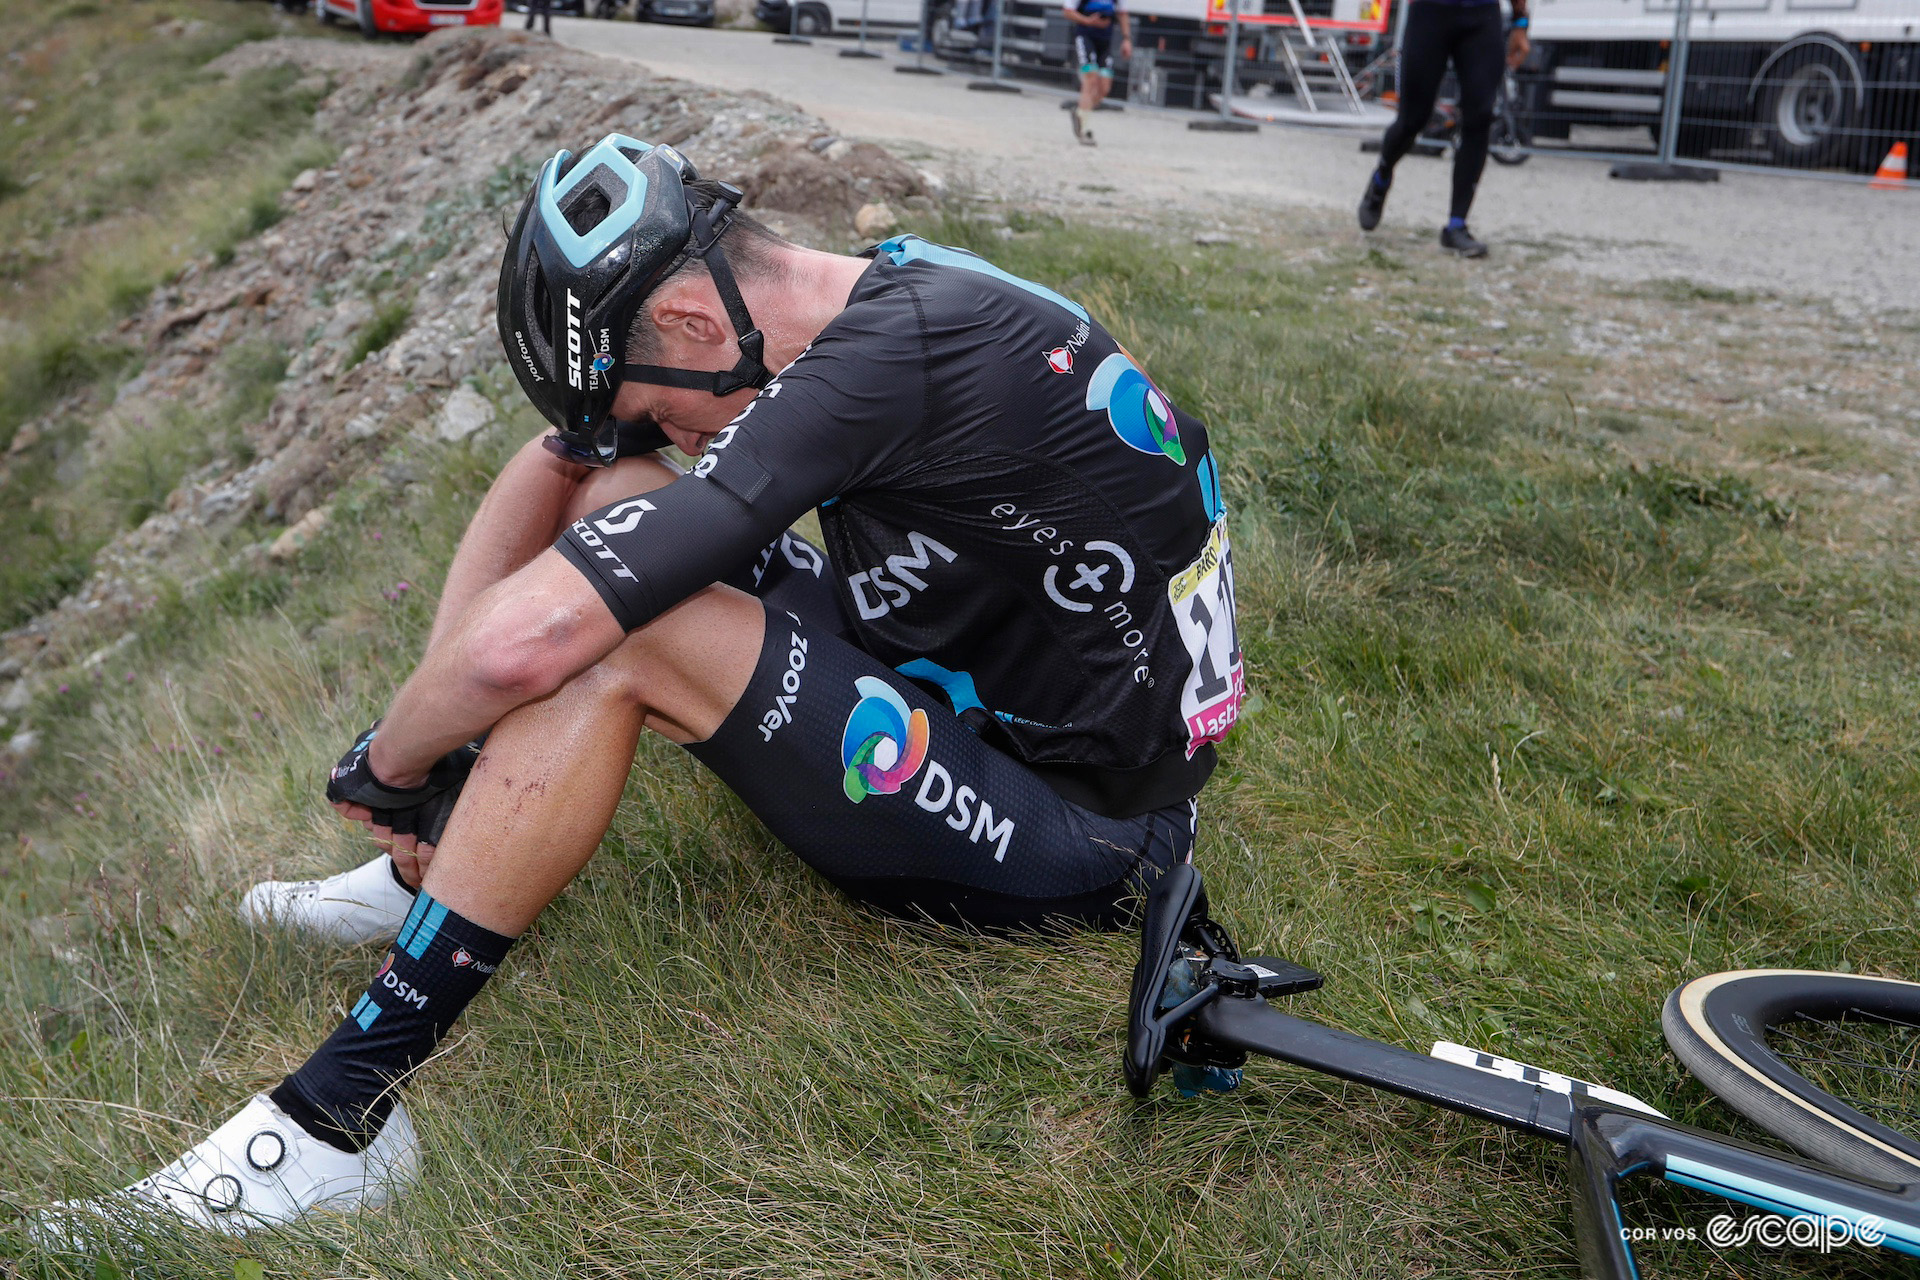 Romain Bardet sits on the grass, head drooping in exhaustion after finishing stage 11 of the 2022 Tour de France on the Col du Granon.